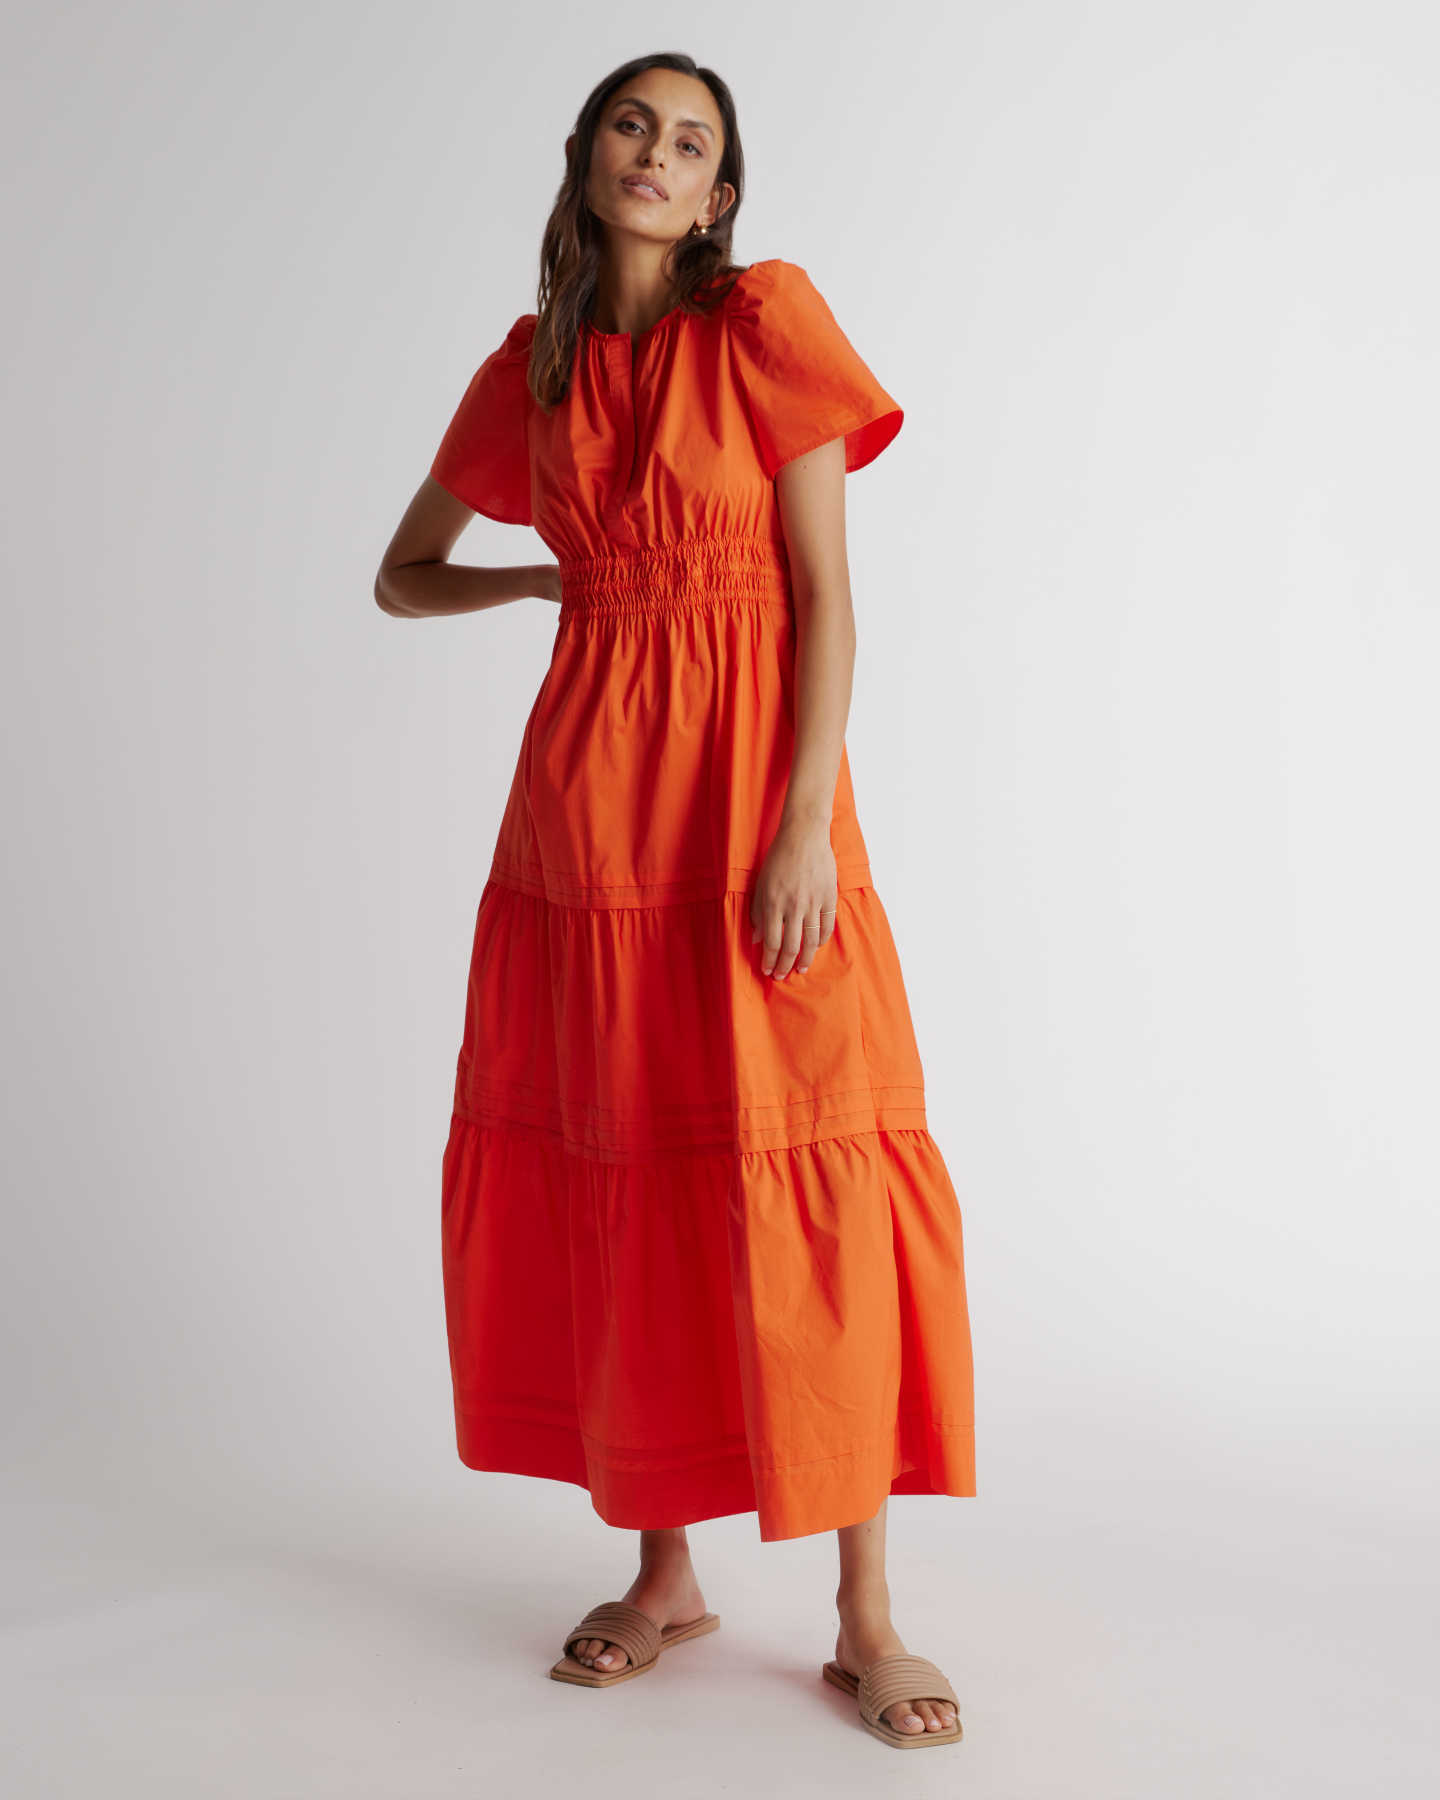 100% Organic Cotton Tiered Maxi Dress - Red